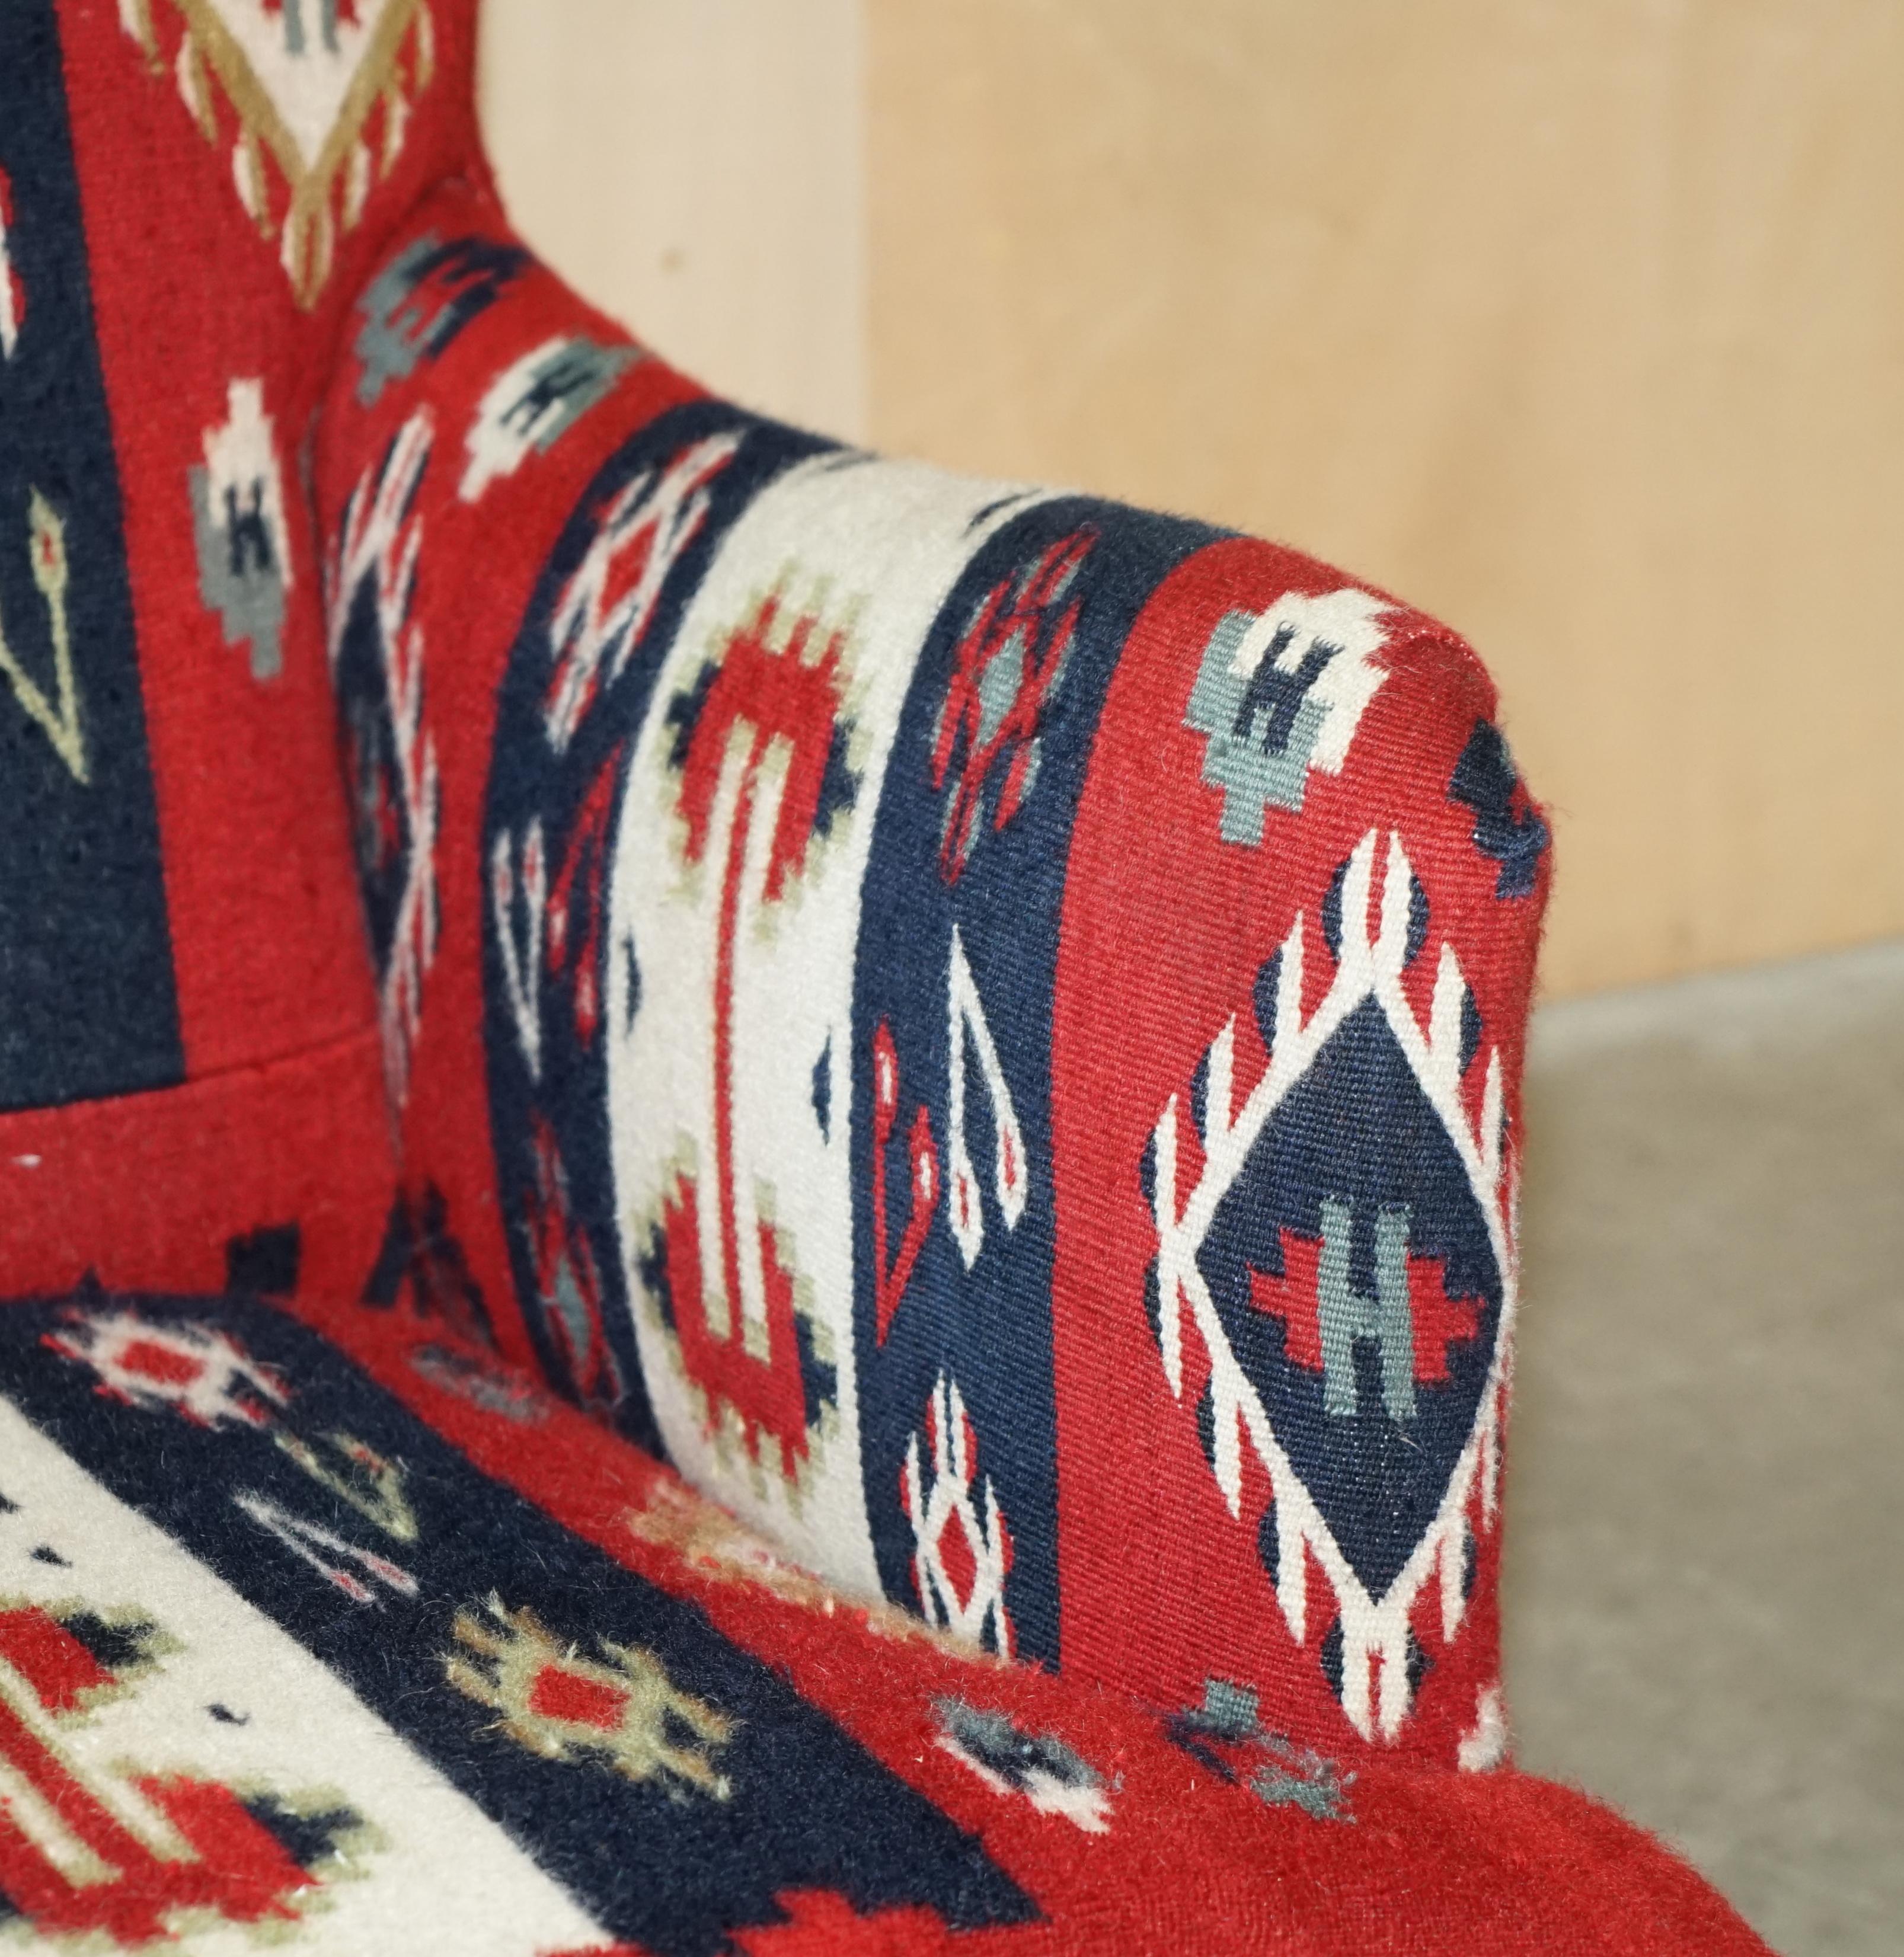 RARE ORIGINAL ViCTORIAN HOWARD & SONS BRIDGEWATER ARMCHAIR WITH KILIM UPHOLSTERY For Sale 2